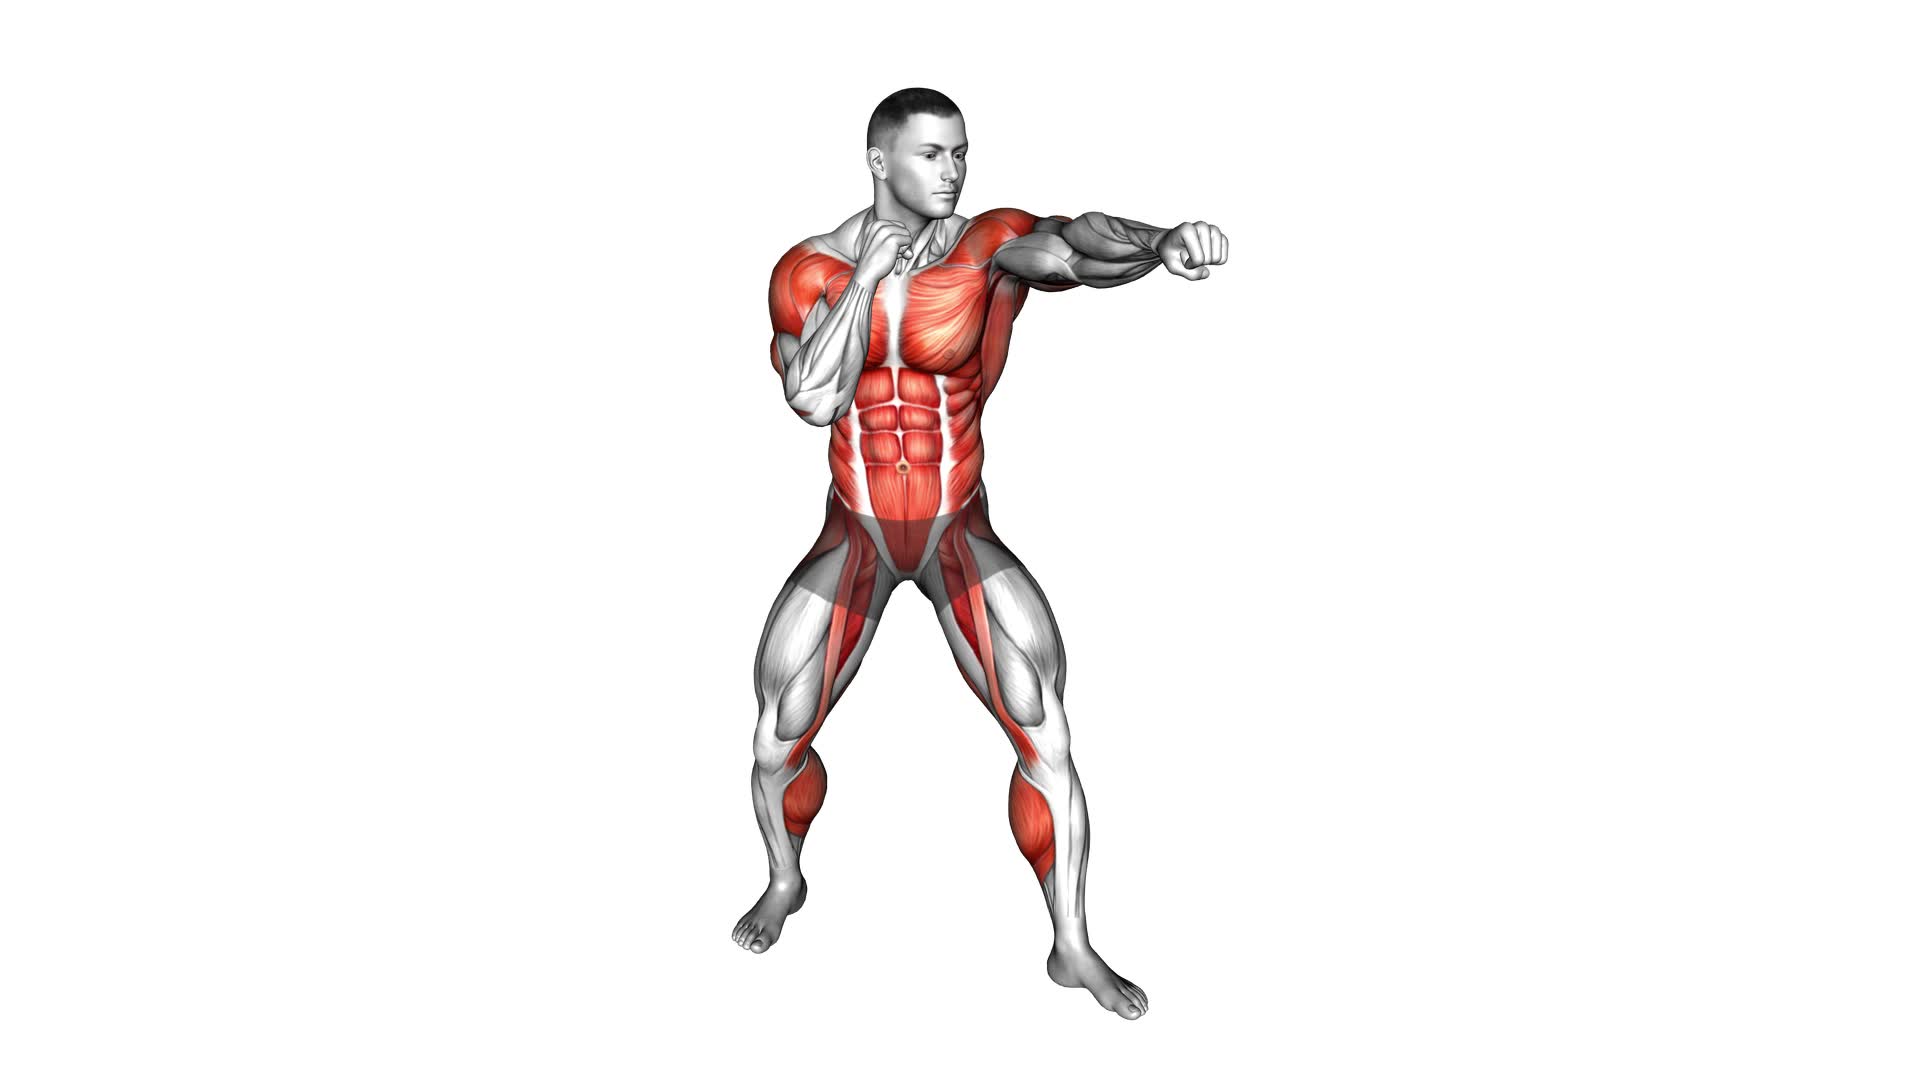 Jab Jab Right Cross (male) - Video Exercise Guide & Tips